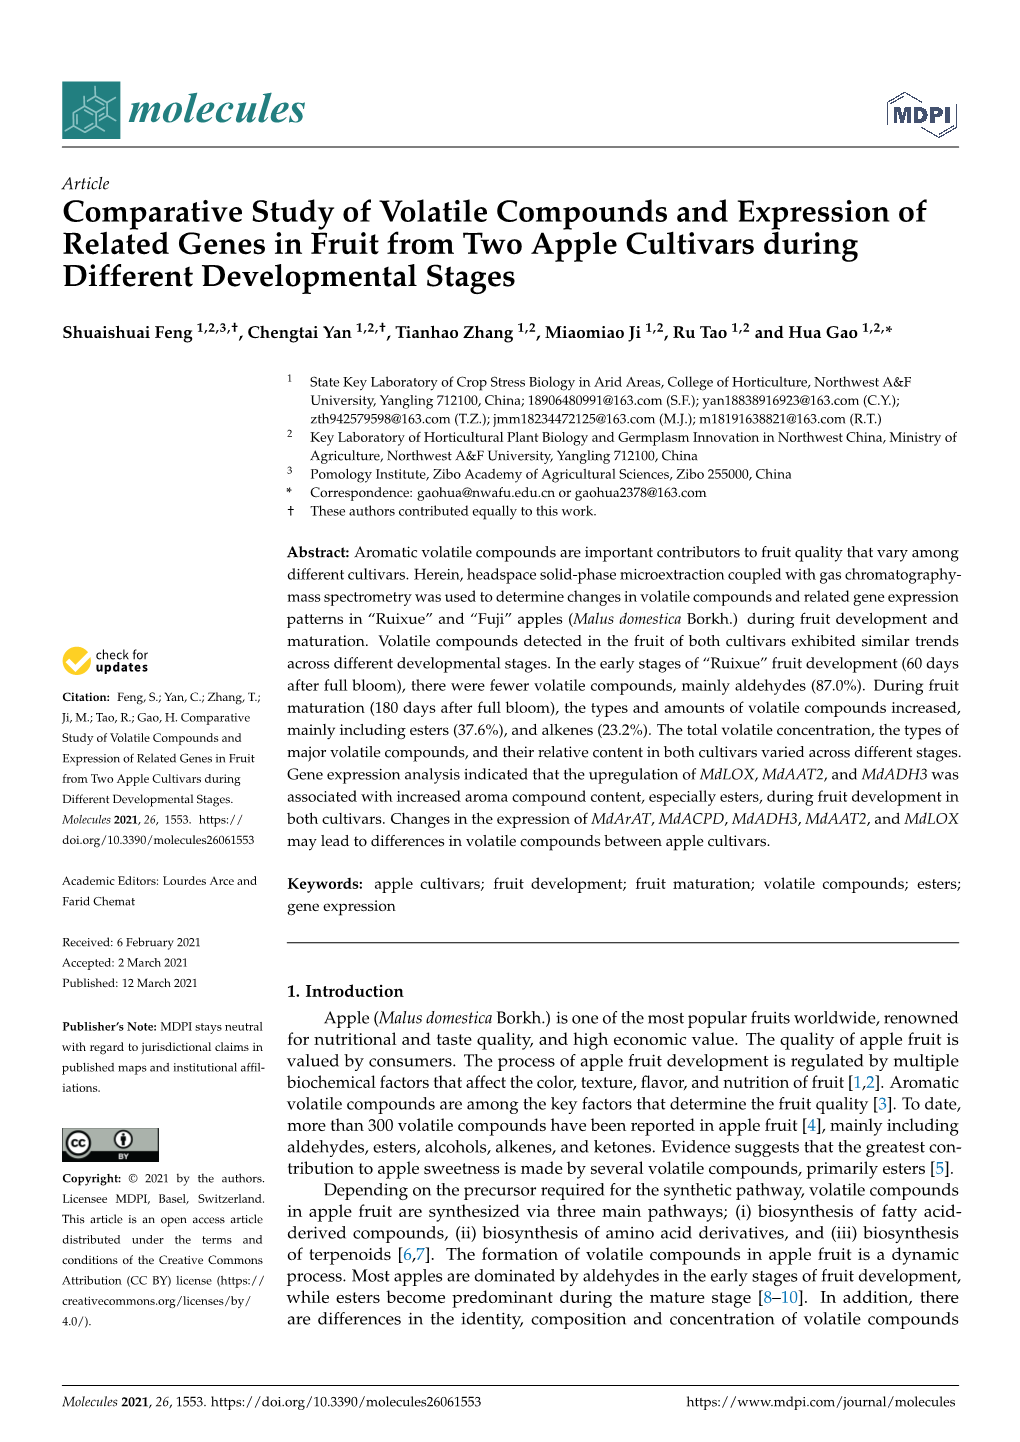 Comparative Study of Volatile Compounds and Expression of Related Genes in Fruit from Two Apple Cultivars During Different Developmental Stages